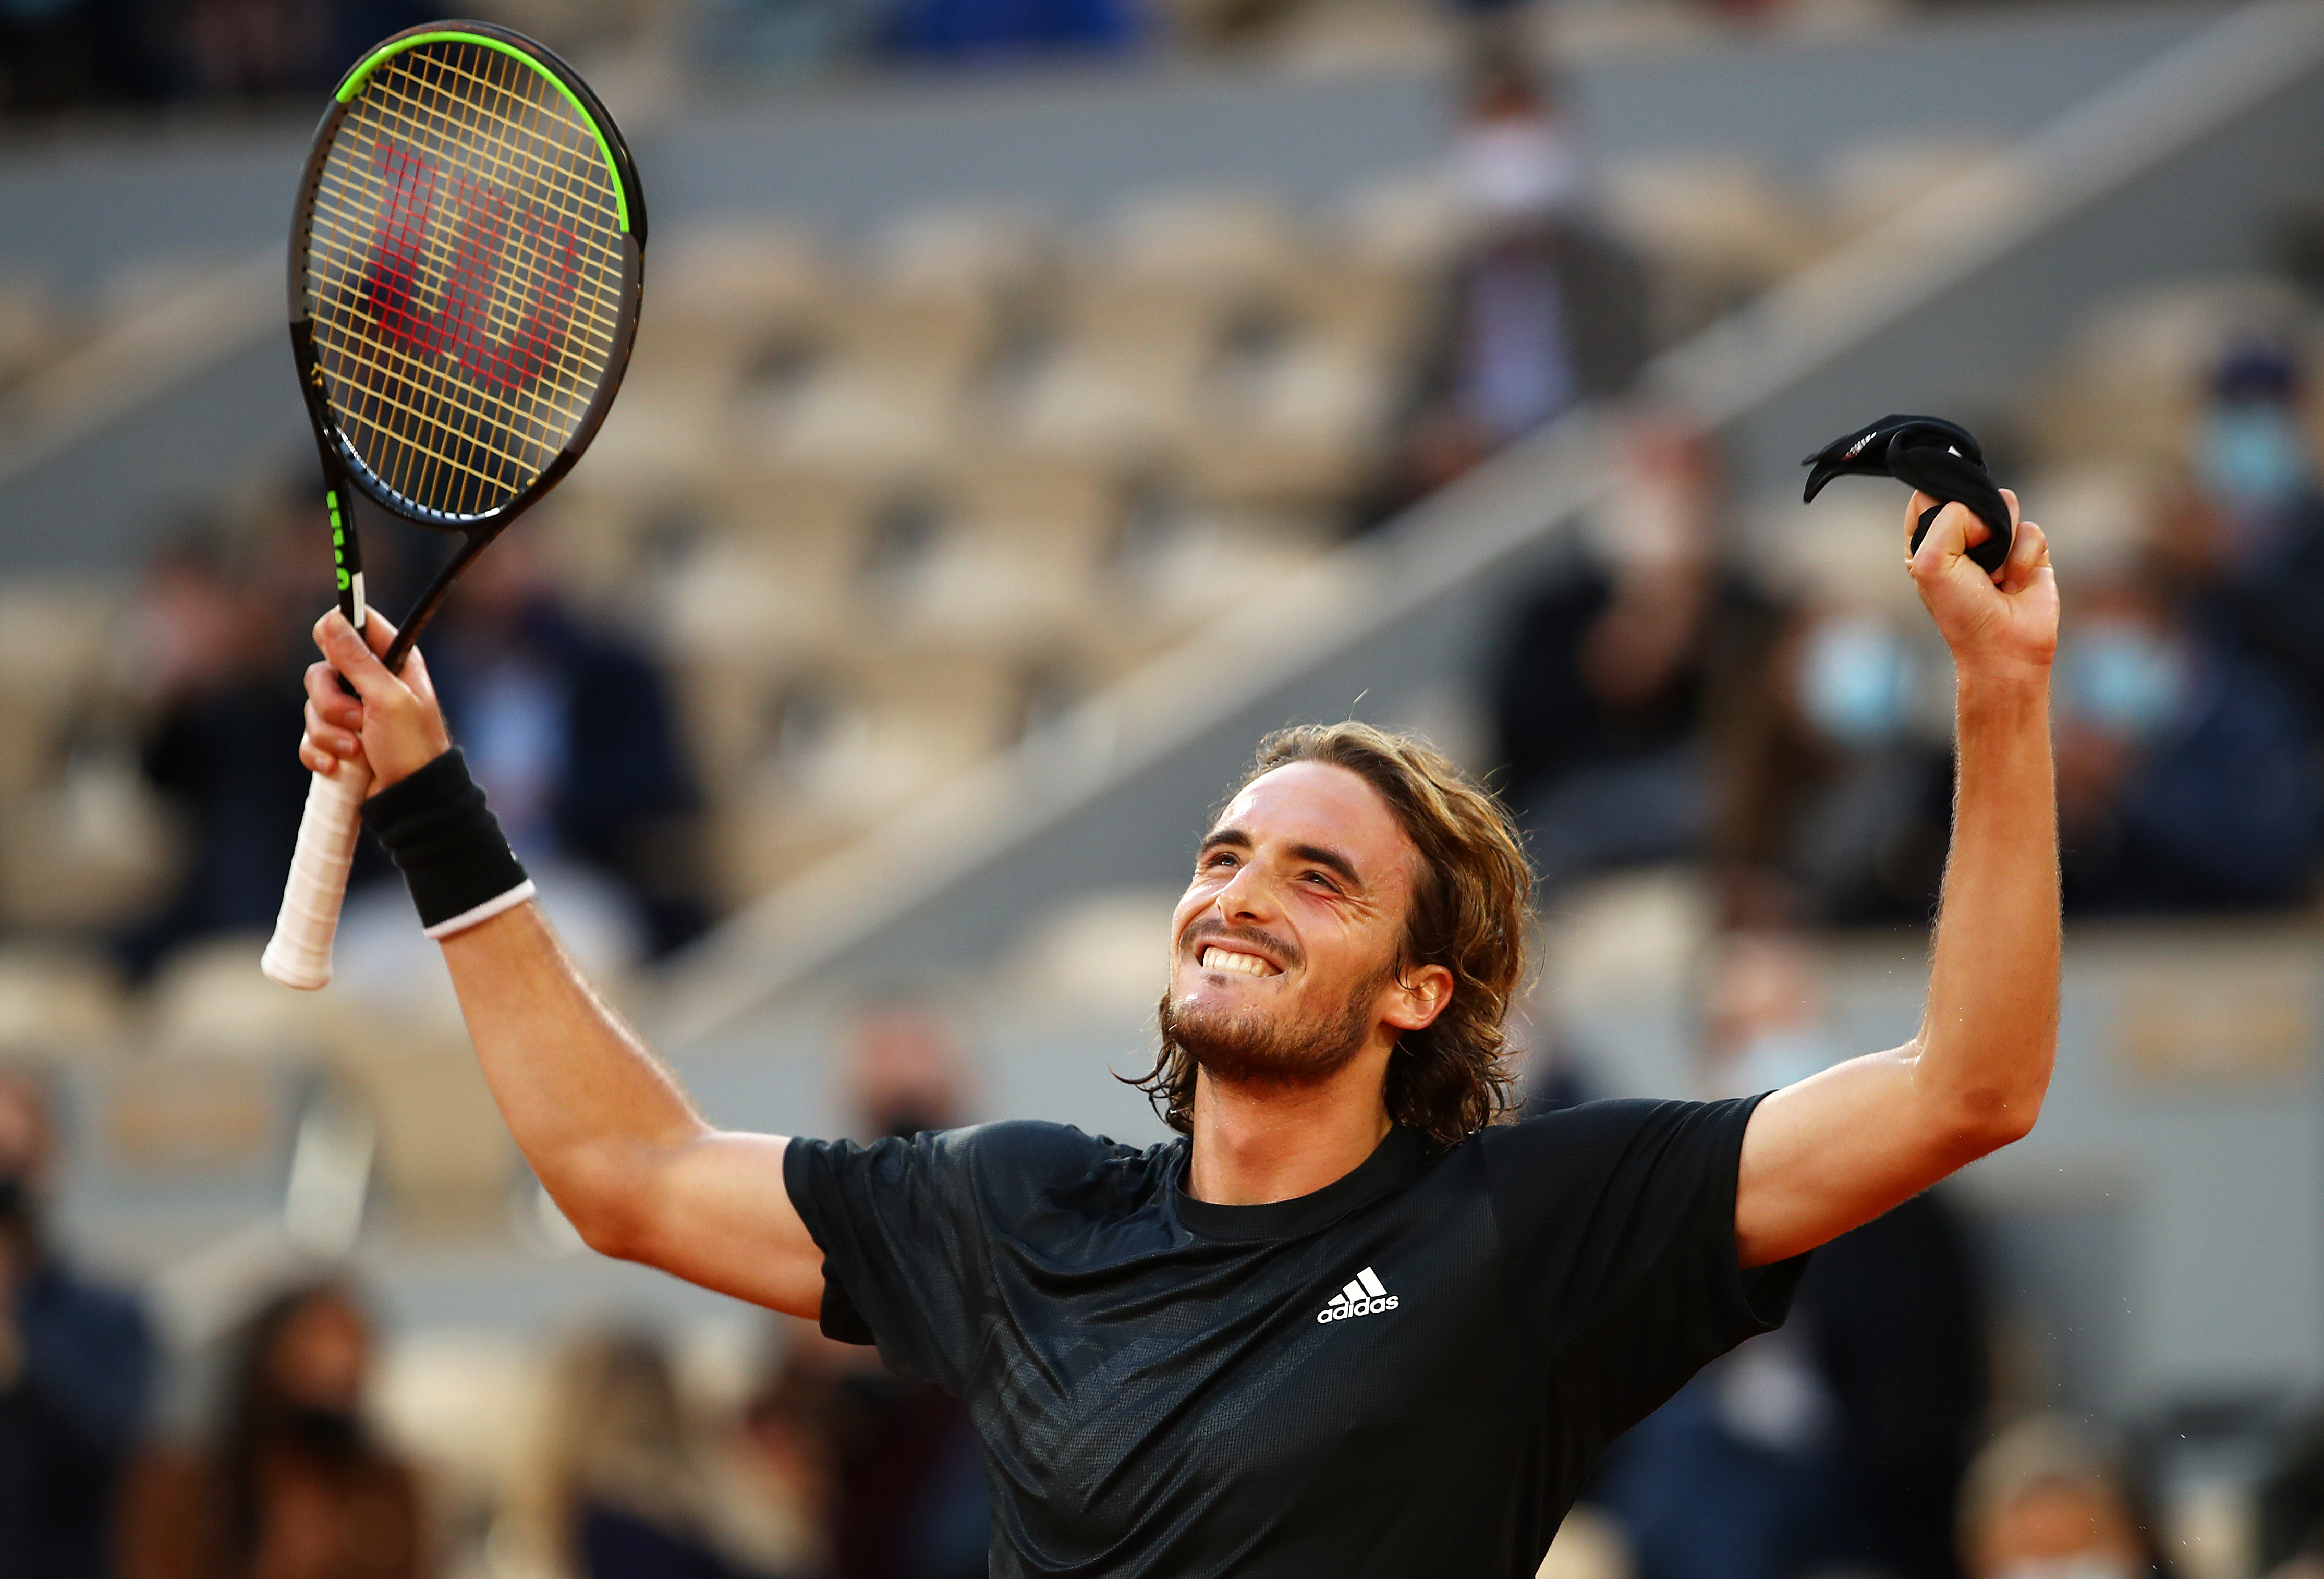 Tsitsipas reaches French Open semis with Rublev - The Mail